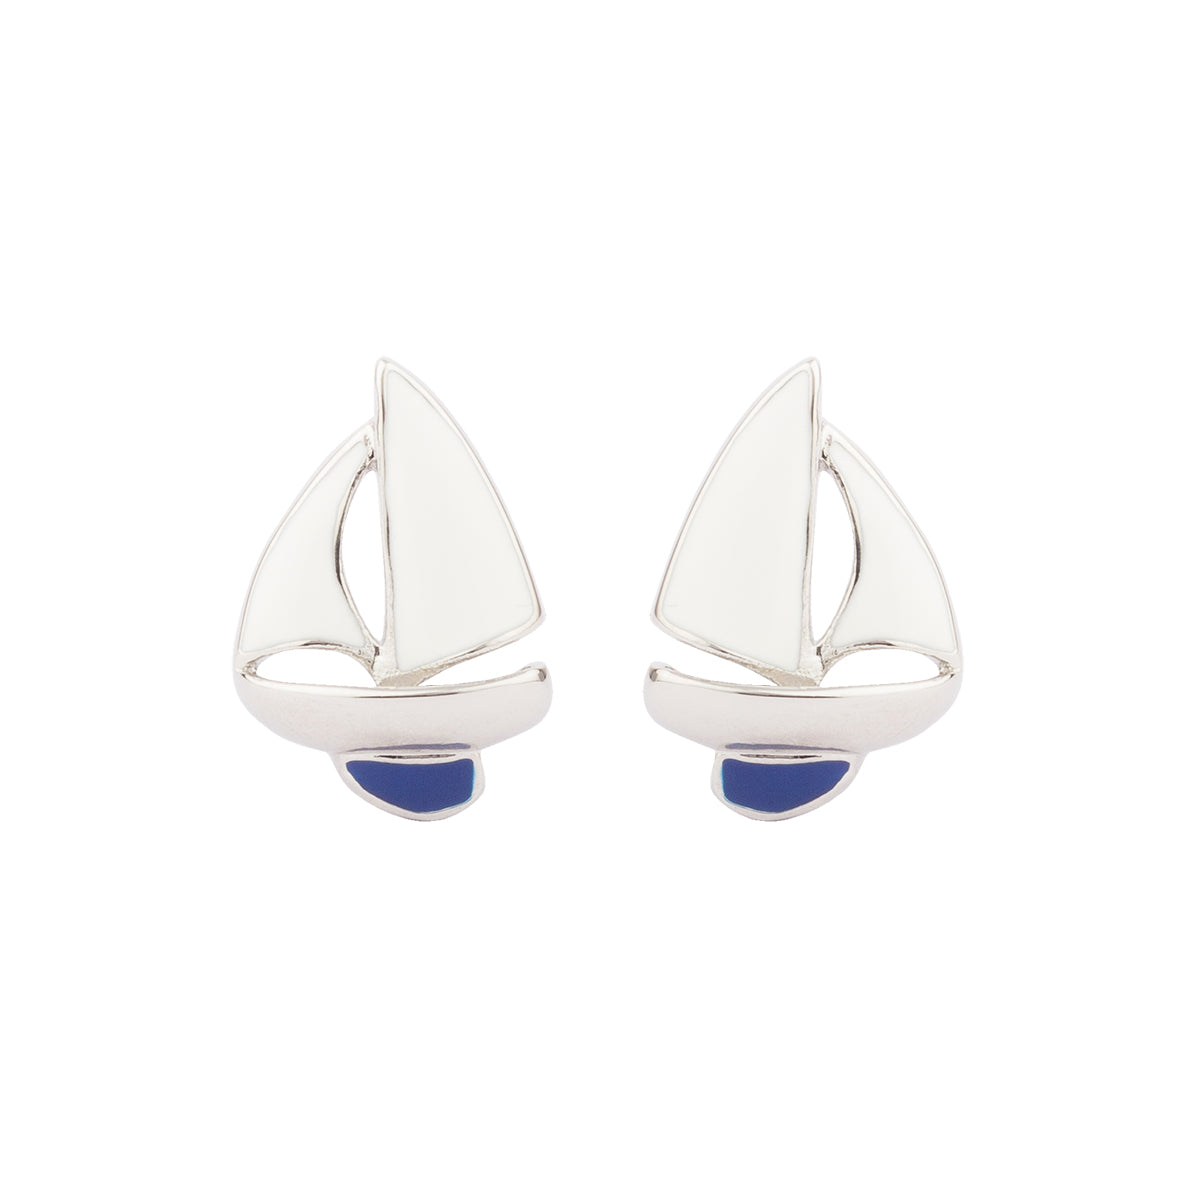 Set your style spirit free and intertwine in wonder with the winds as they catch the sails of this unconventional set of cufflinks. 